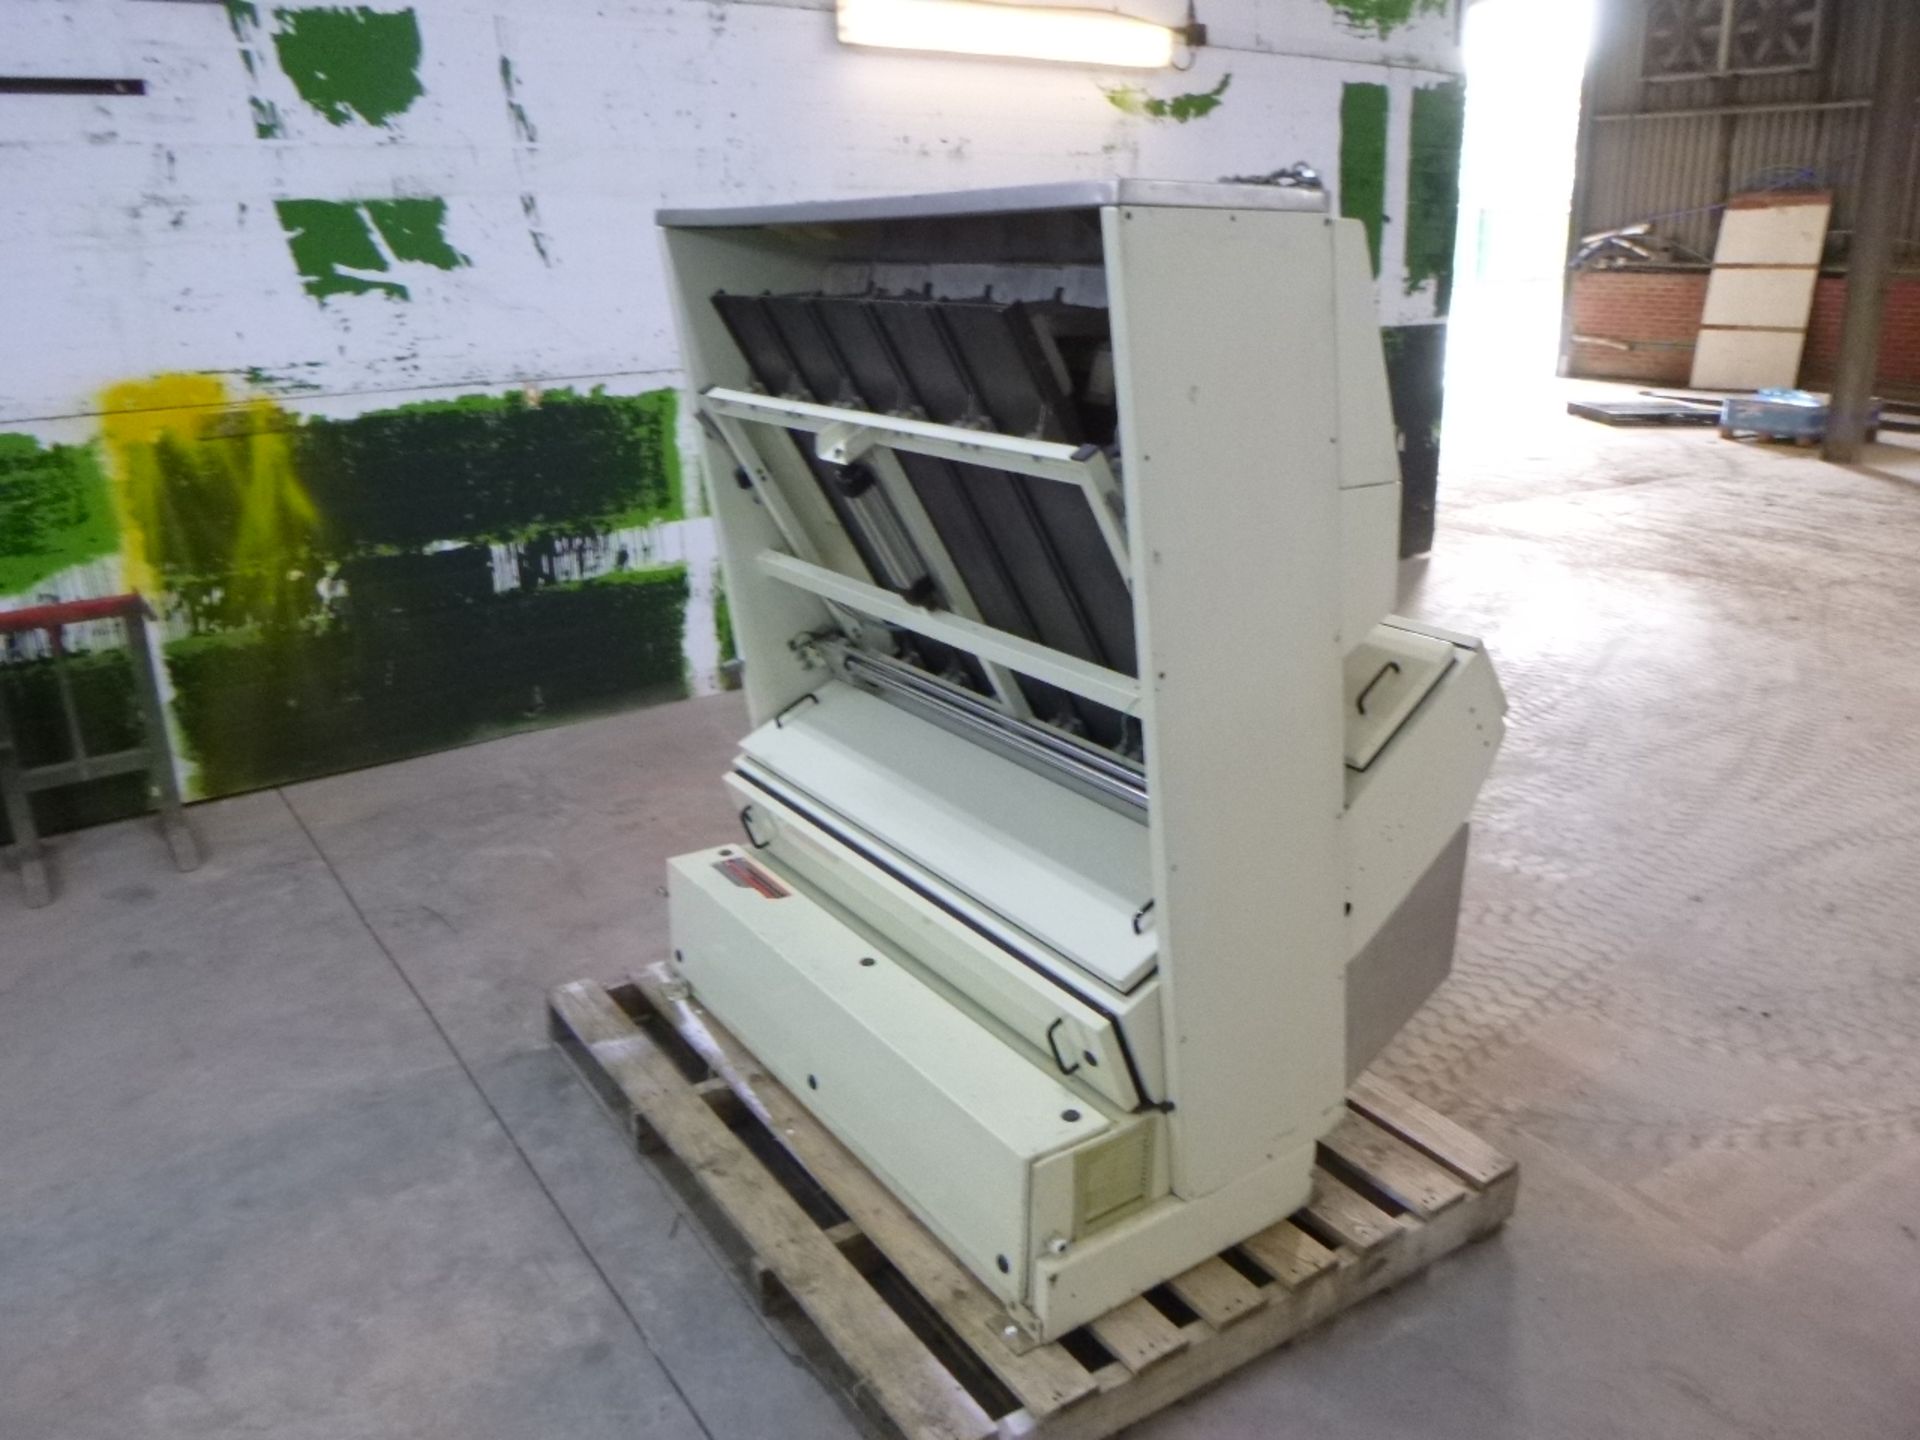 Satake AS 160967 Alpha Scan Colour Sorter, year of manufacture 2007, 1700 watts, 220V (vendors - Image 3 of 11